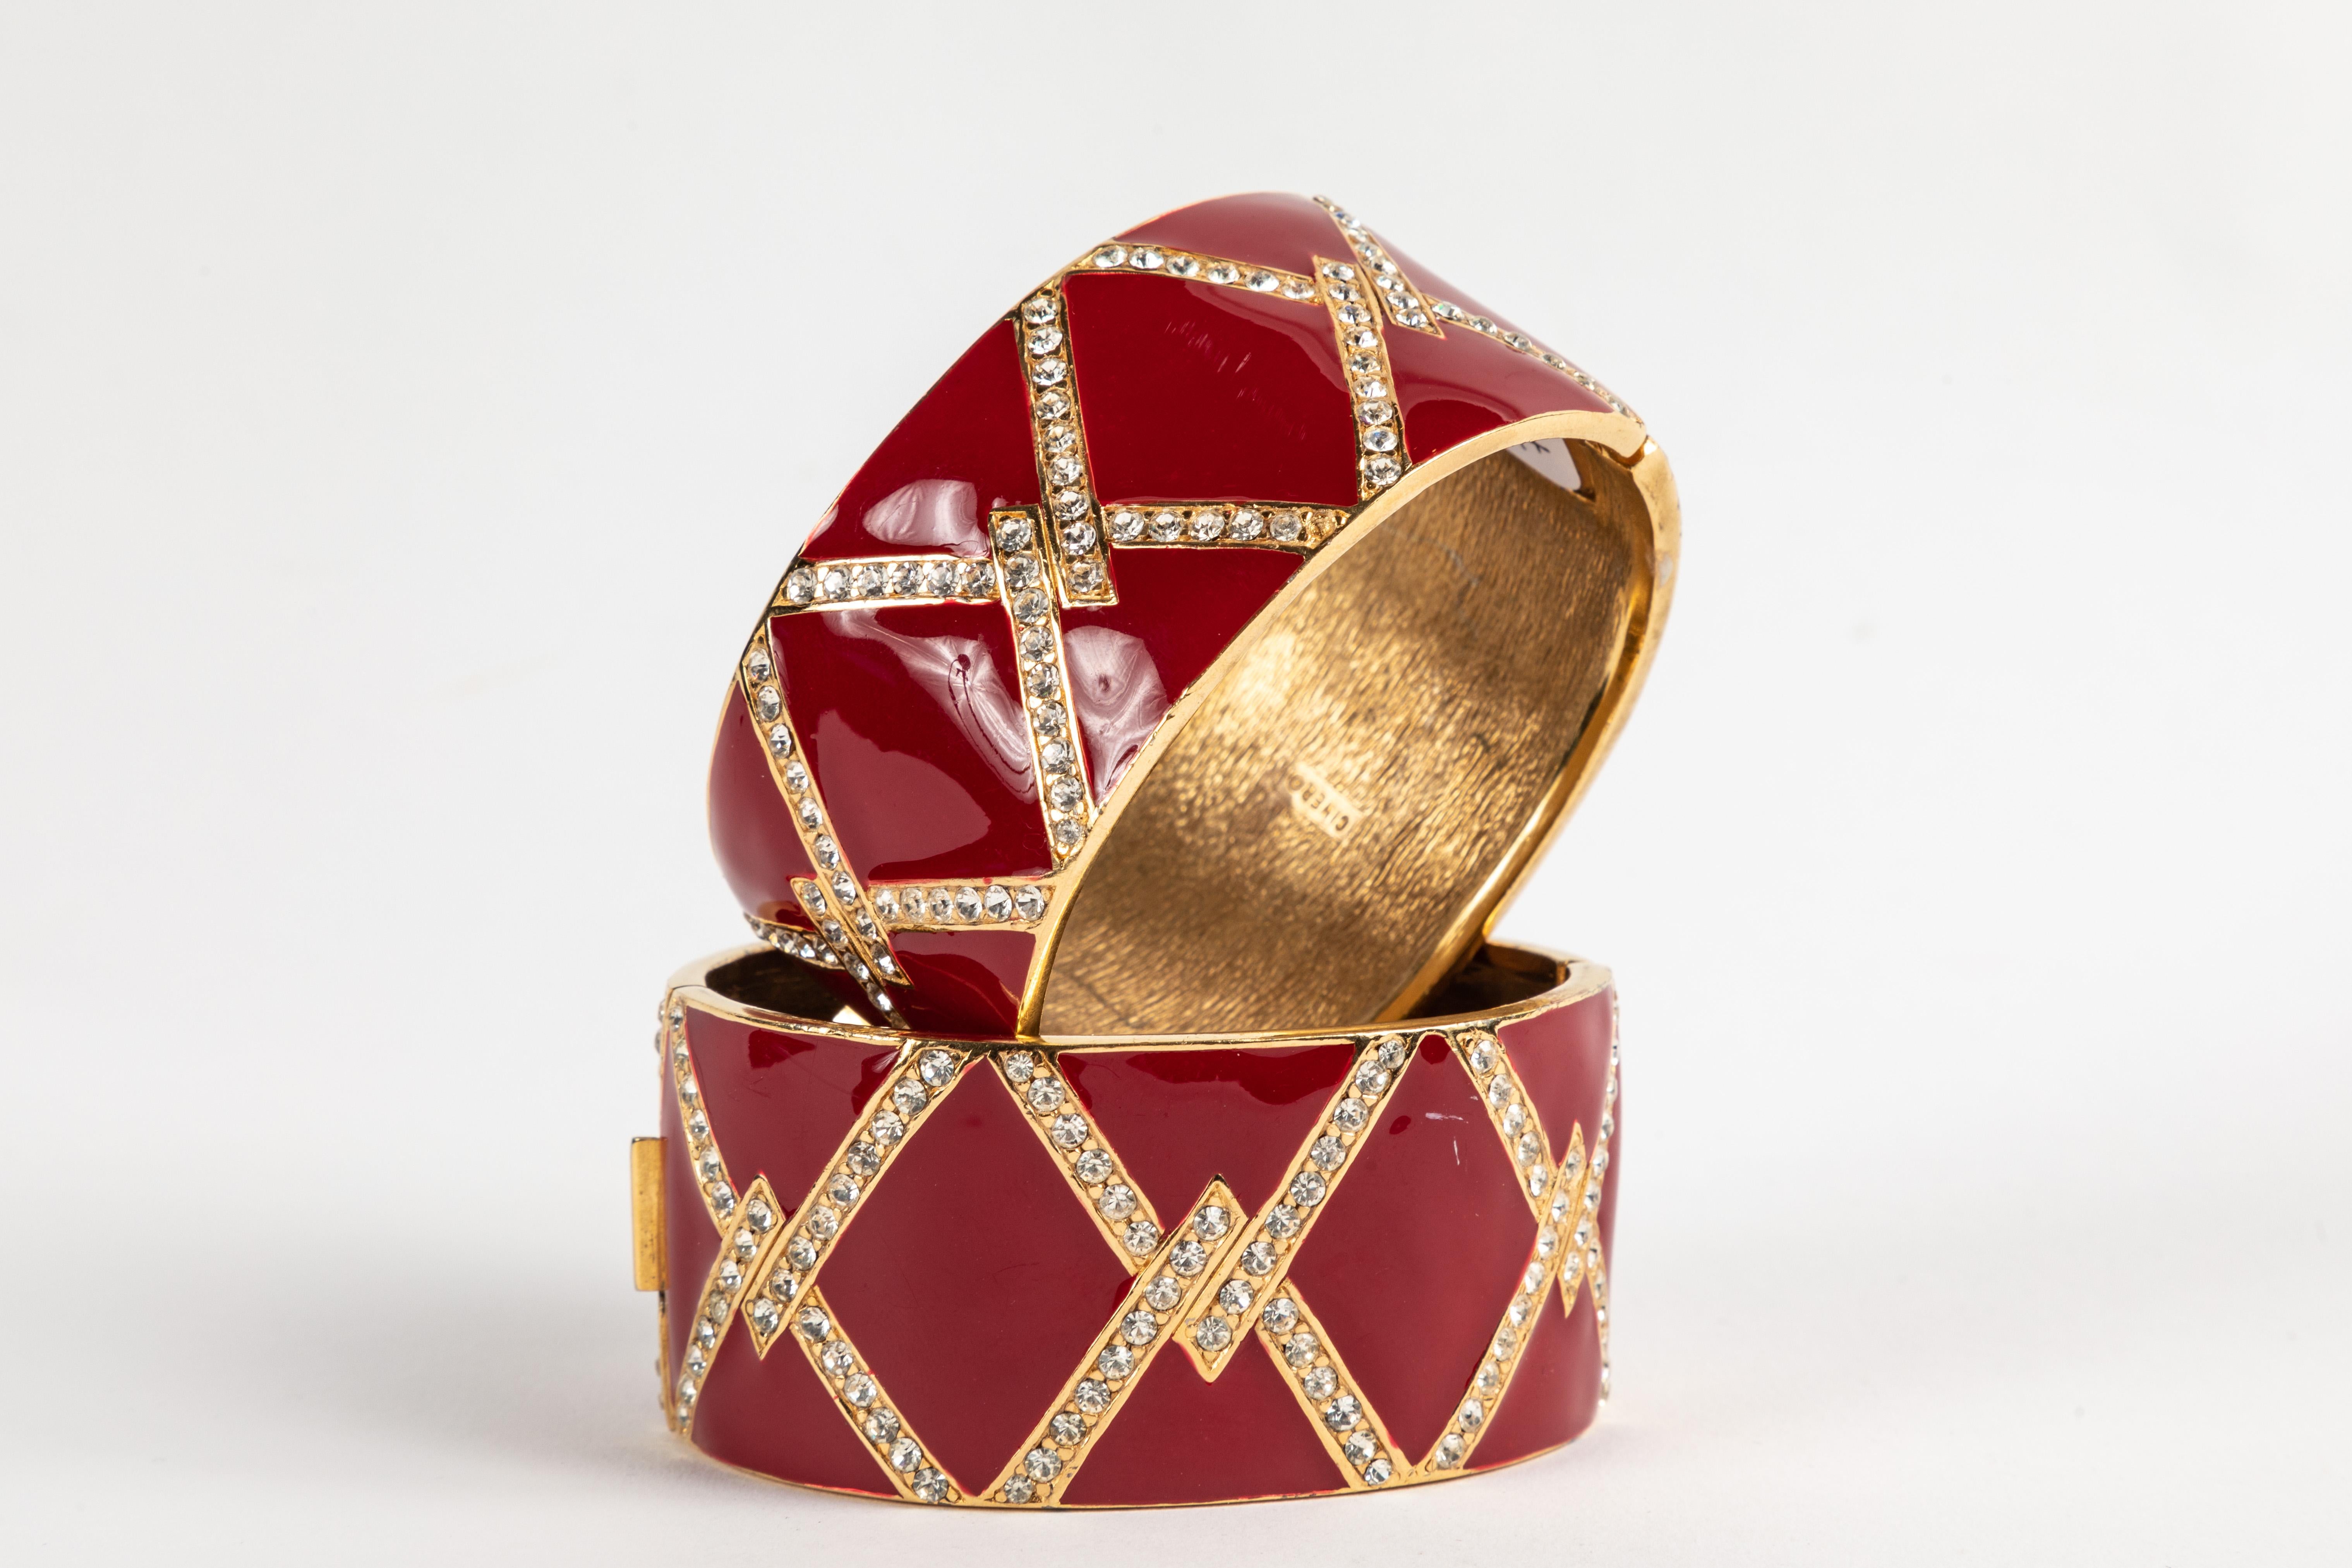 Beautiful matched pair of cuffs with a striking red enamel finish set with brilliant rhinestones set in a gold plated metal.  Signed on the inside 